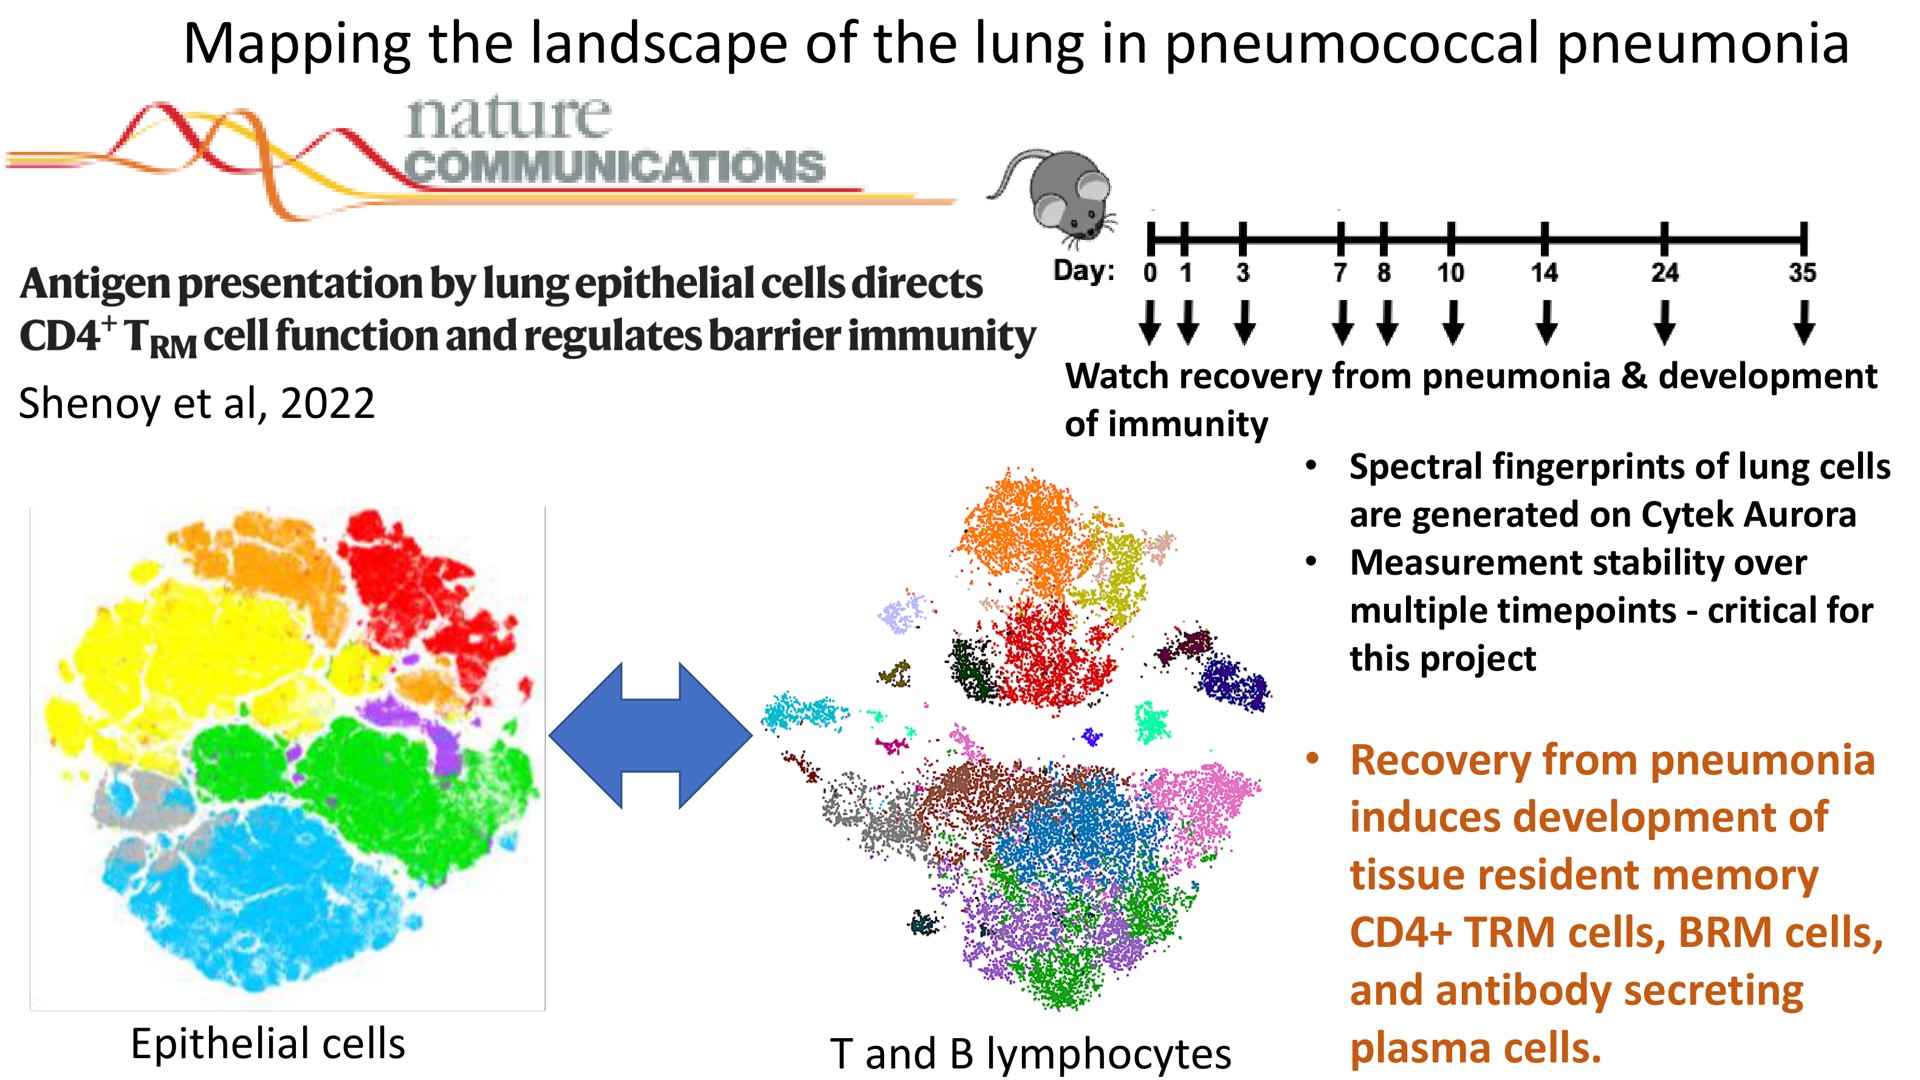 mapping the landscape of the lung in pneumococcal pneumonia nature antigen presentation by epithelial cell function and regulates barrier immunity i | Cytek